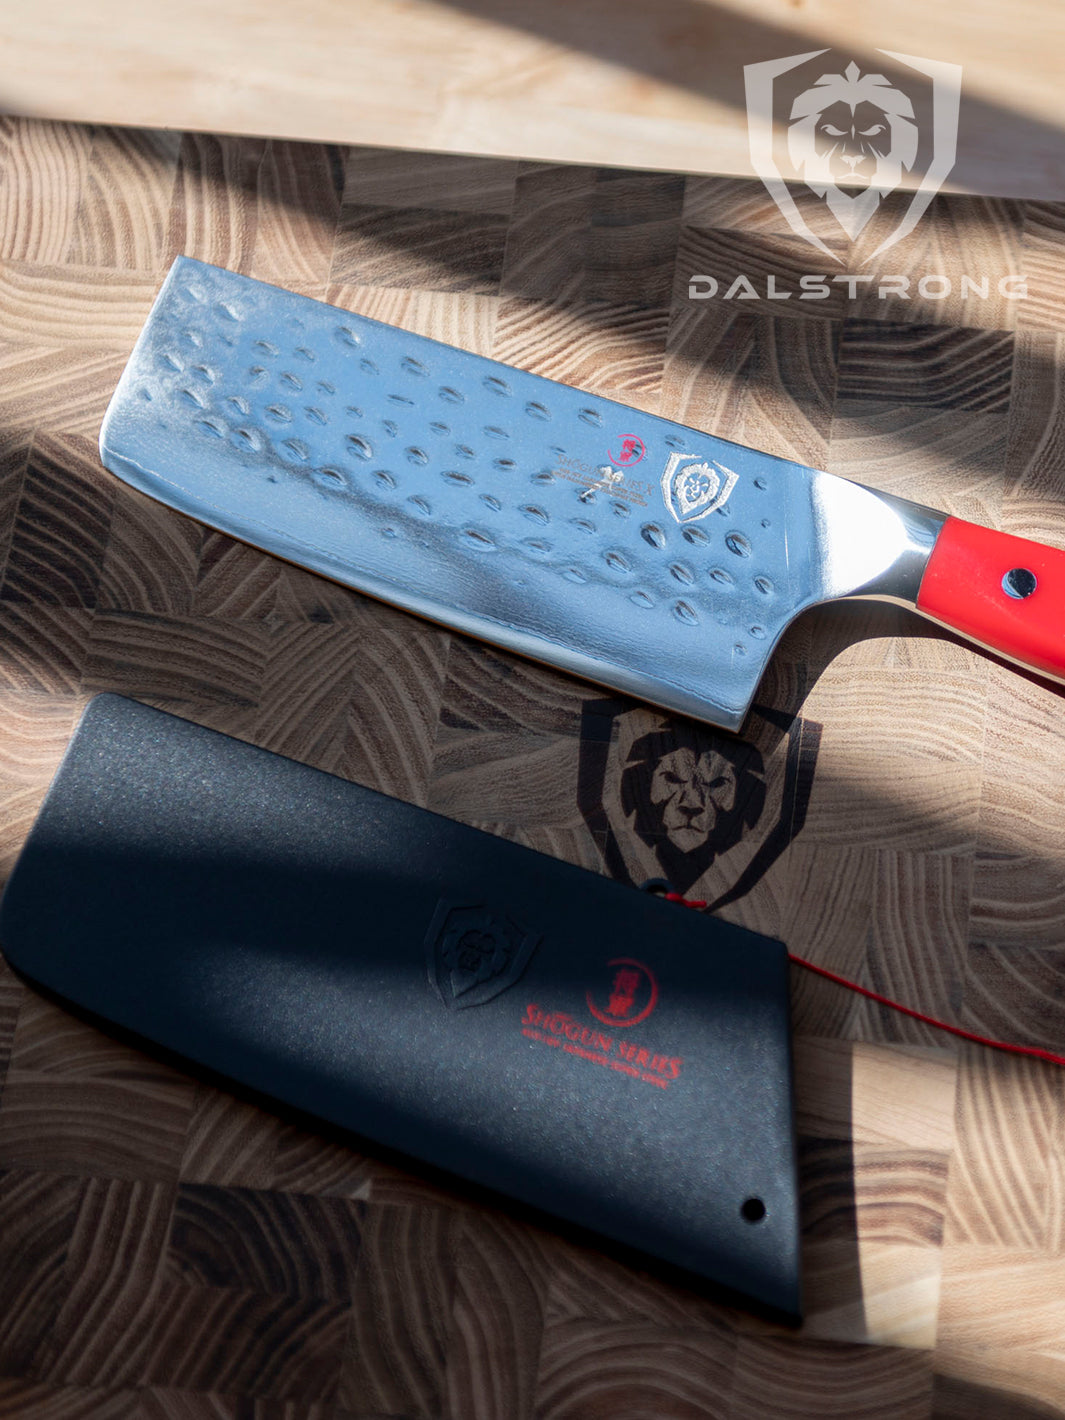 Dalstrong Nakiri Asian Vegetable Knife - 6 inch Offset Blade - Gladiator Series Elite - Forged German High-Carbon Steel - Sheath Included - NSF